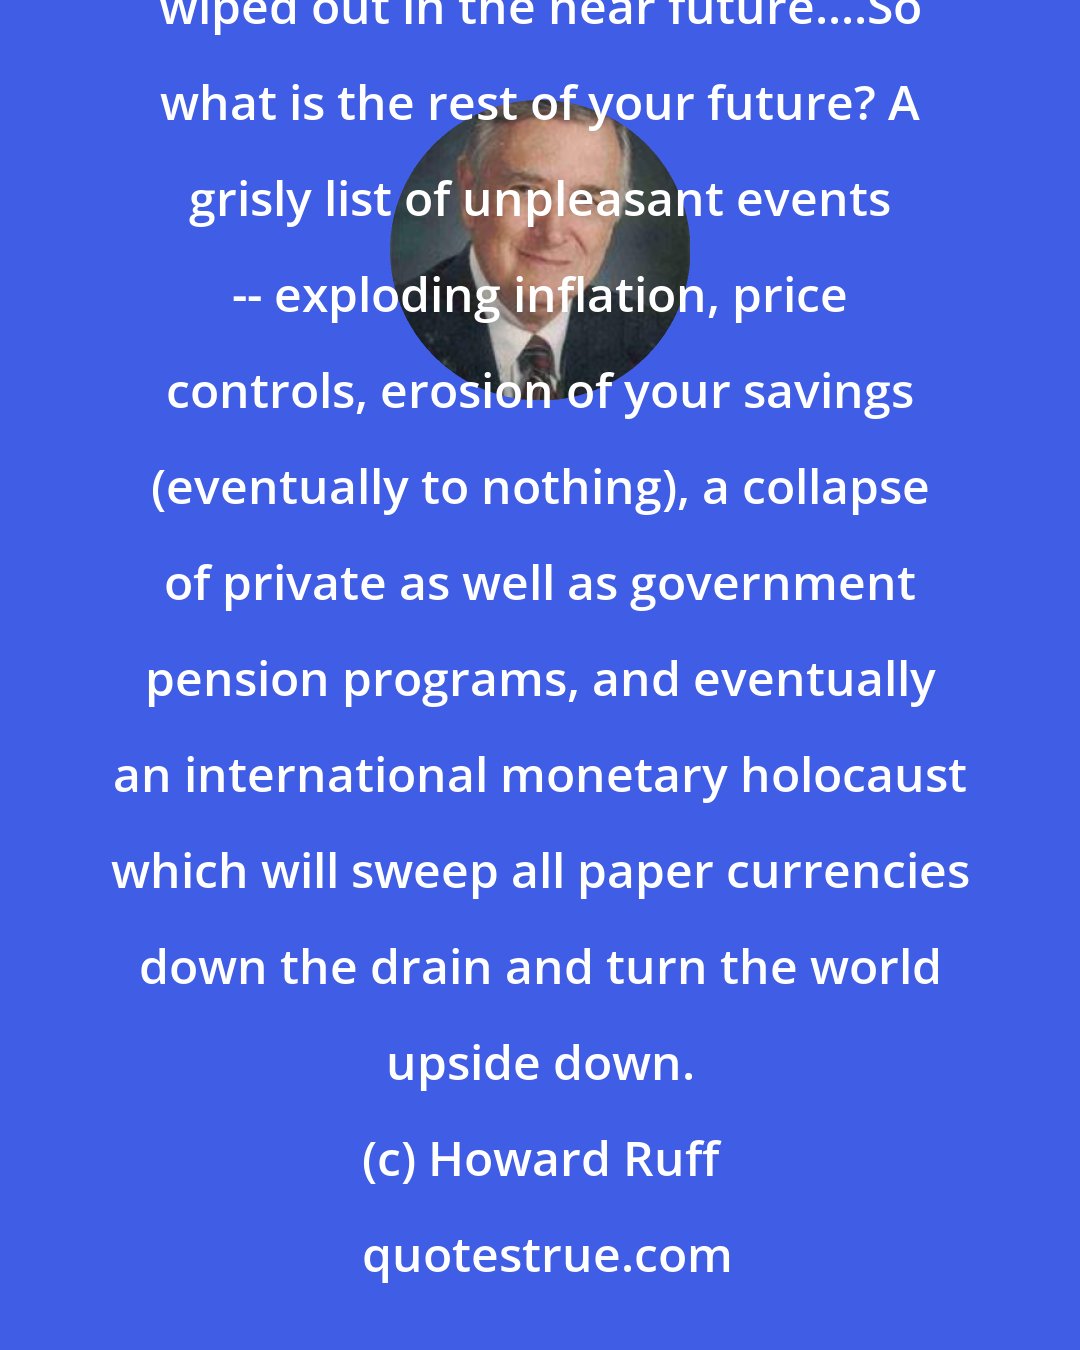 Howard Ruff: Much of American wealth is an illusion which is being secretly gnawed away and much of it will be completely wiped out in the near future....So what is the rest of your future? A grisly list of unpleasant events -- exploding inflation, price controls, erosion of your savings (eventually to nothing), a collapse of private as well as government pension programs, and eventually an international monetary holocaust which will sweep all paper currencies down the drain and turn the world upside down.